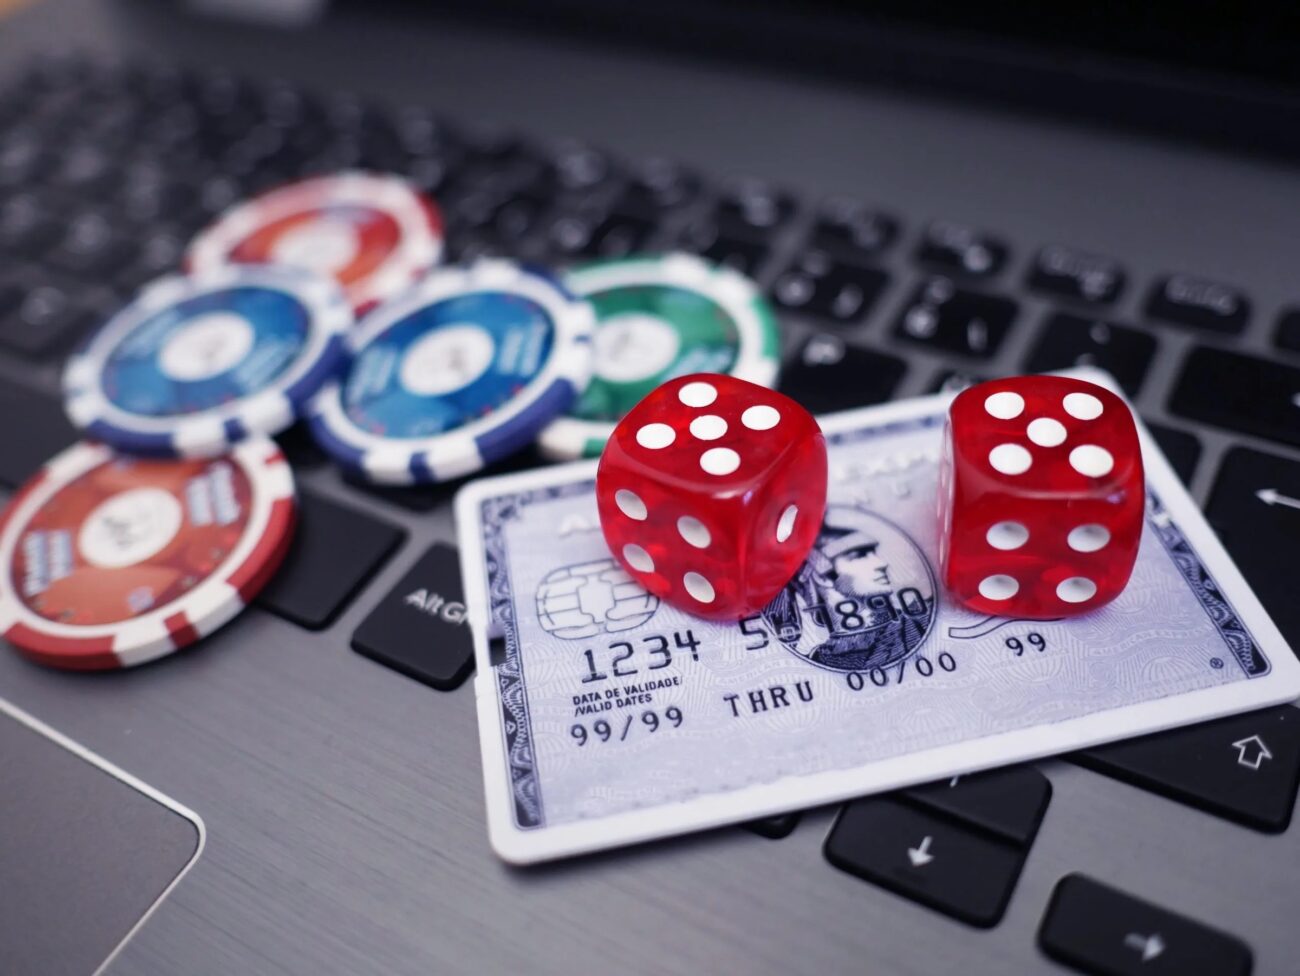 Technology has had a significant impact on the world of casino gaming, and slot gaming is no exception.